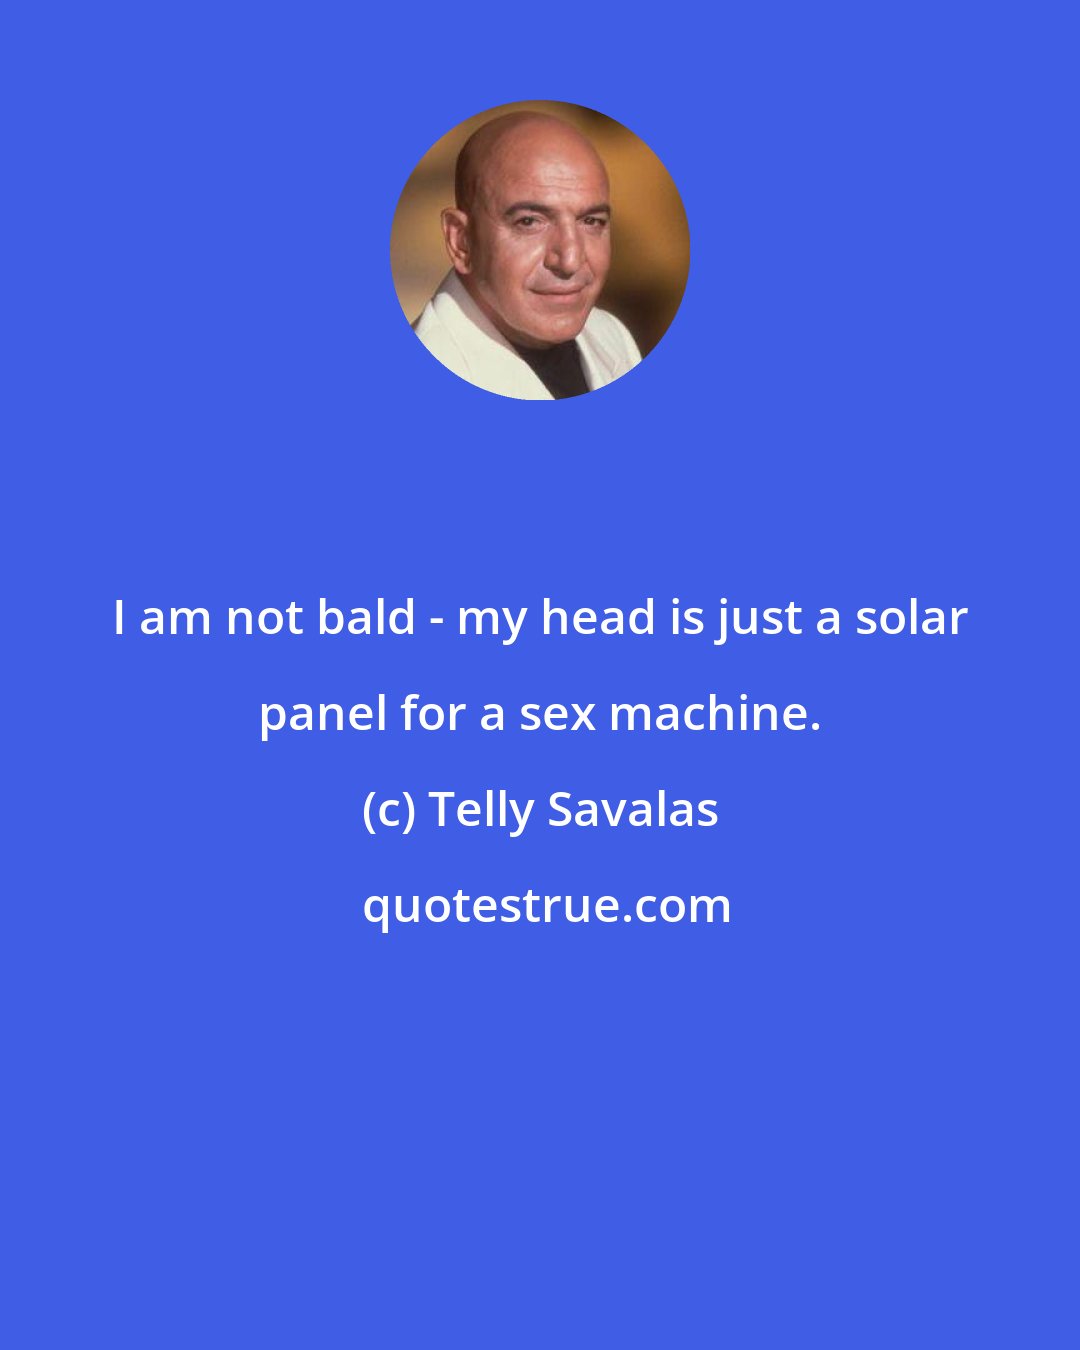 Telly Savalas: I am not bald - my head is just a solar panel for a sex machine.